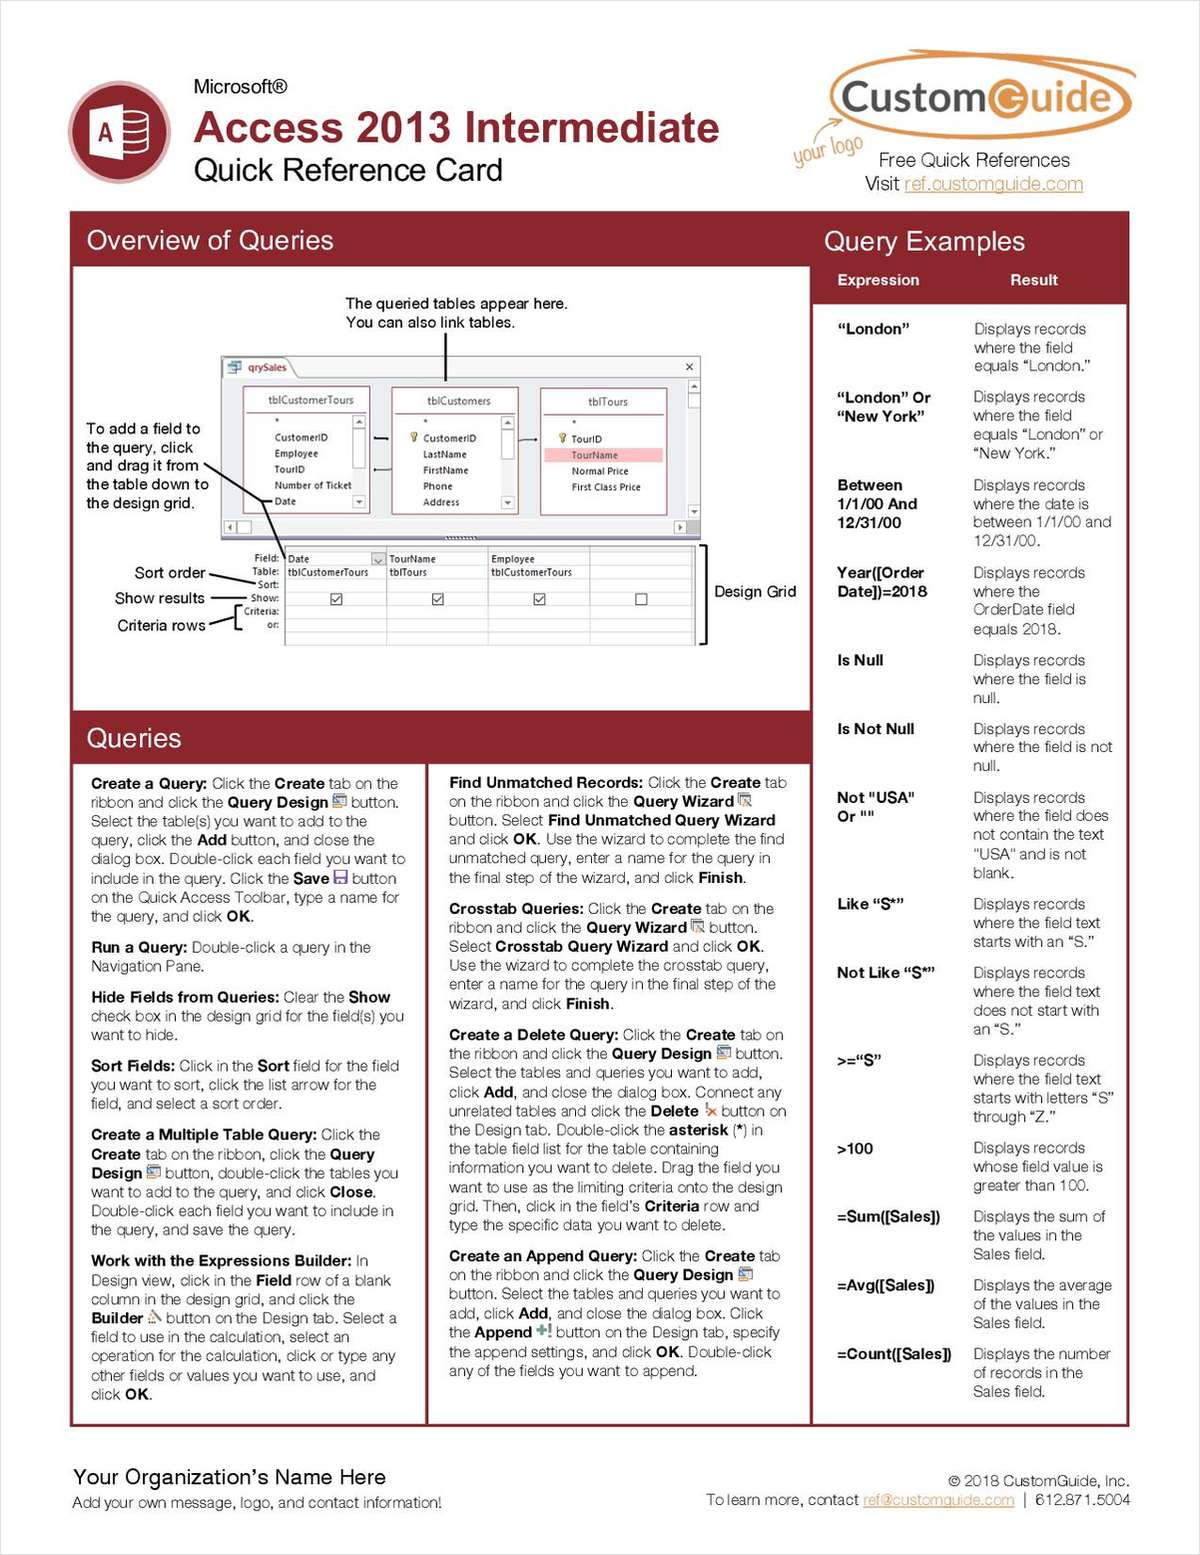 Microsoft Access 2013 Intermediate - Free Quick Reference Card